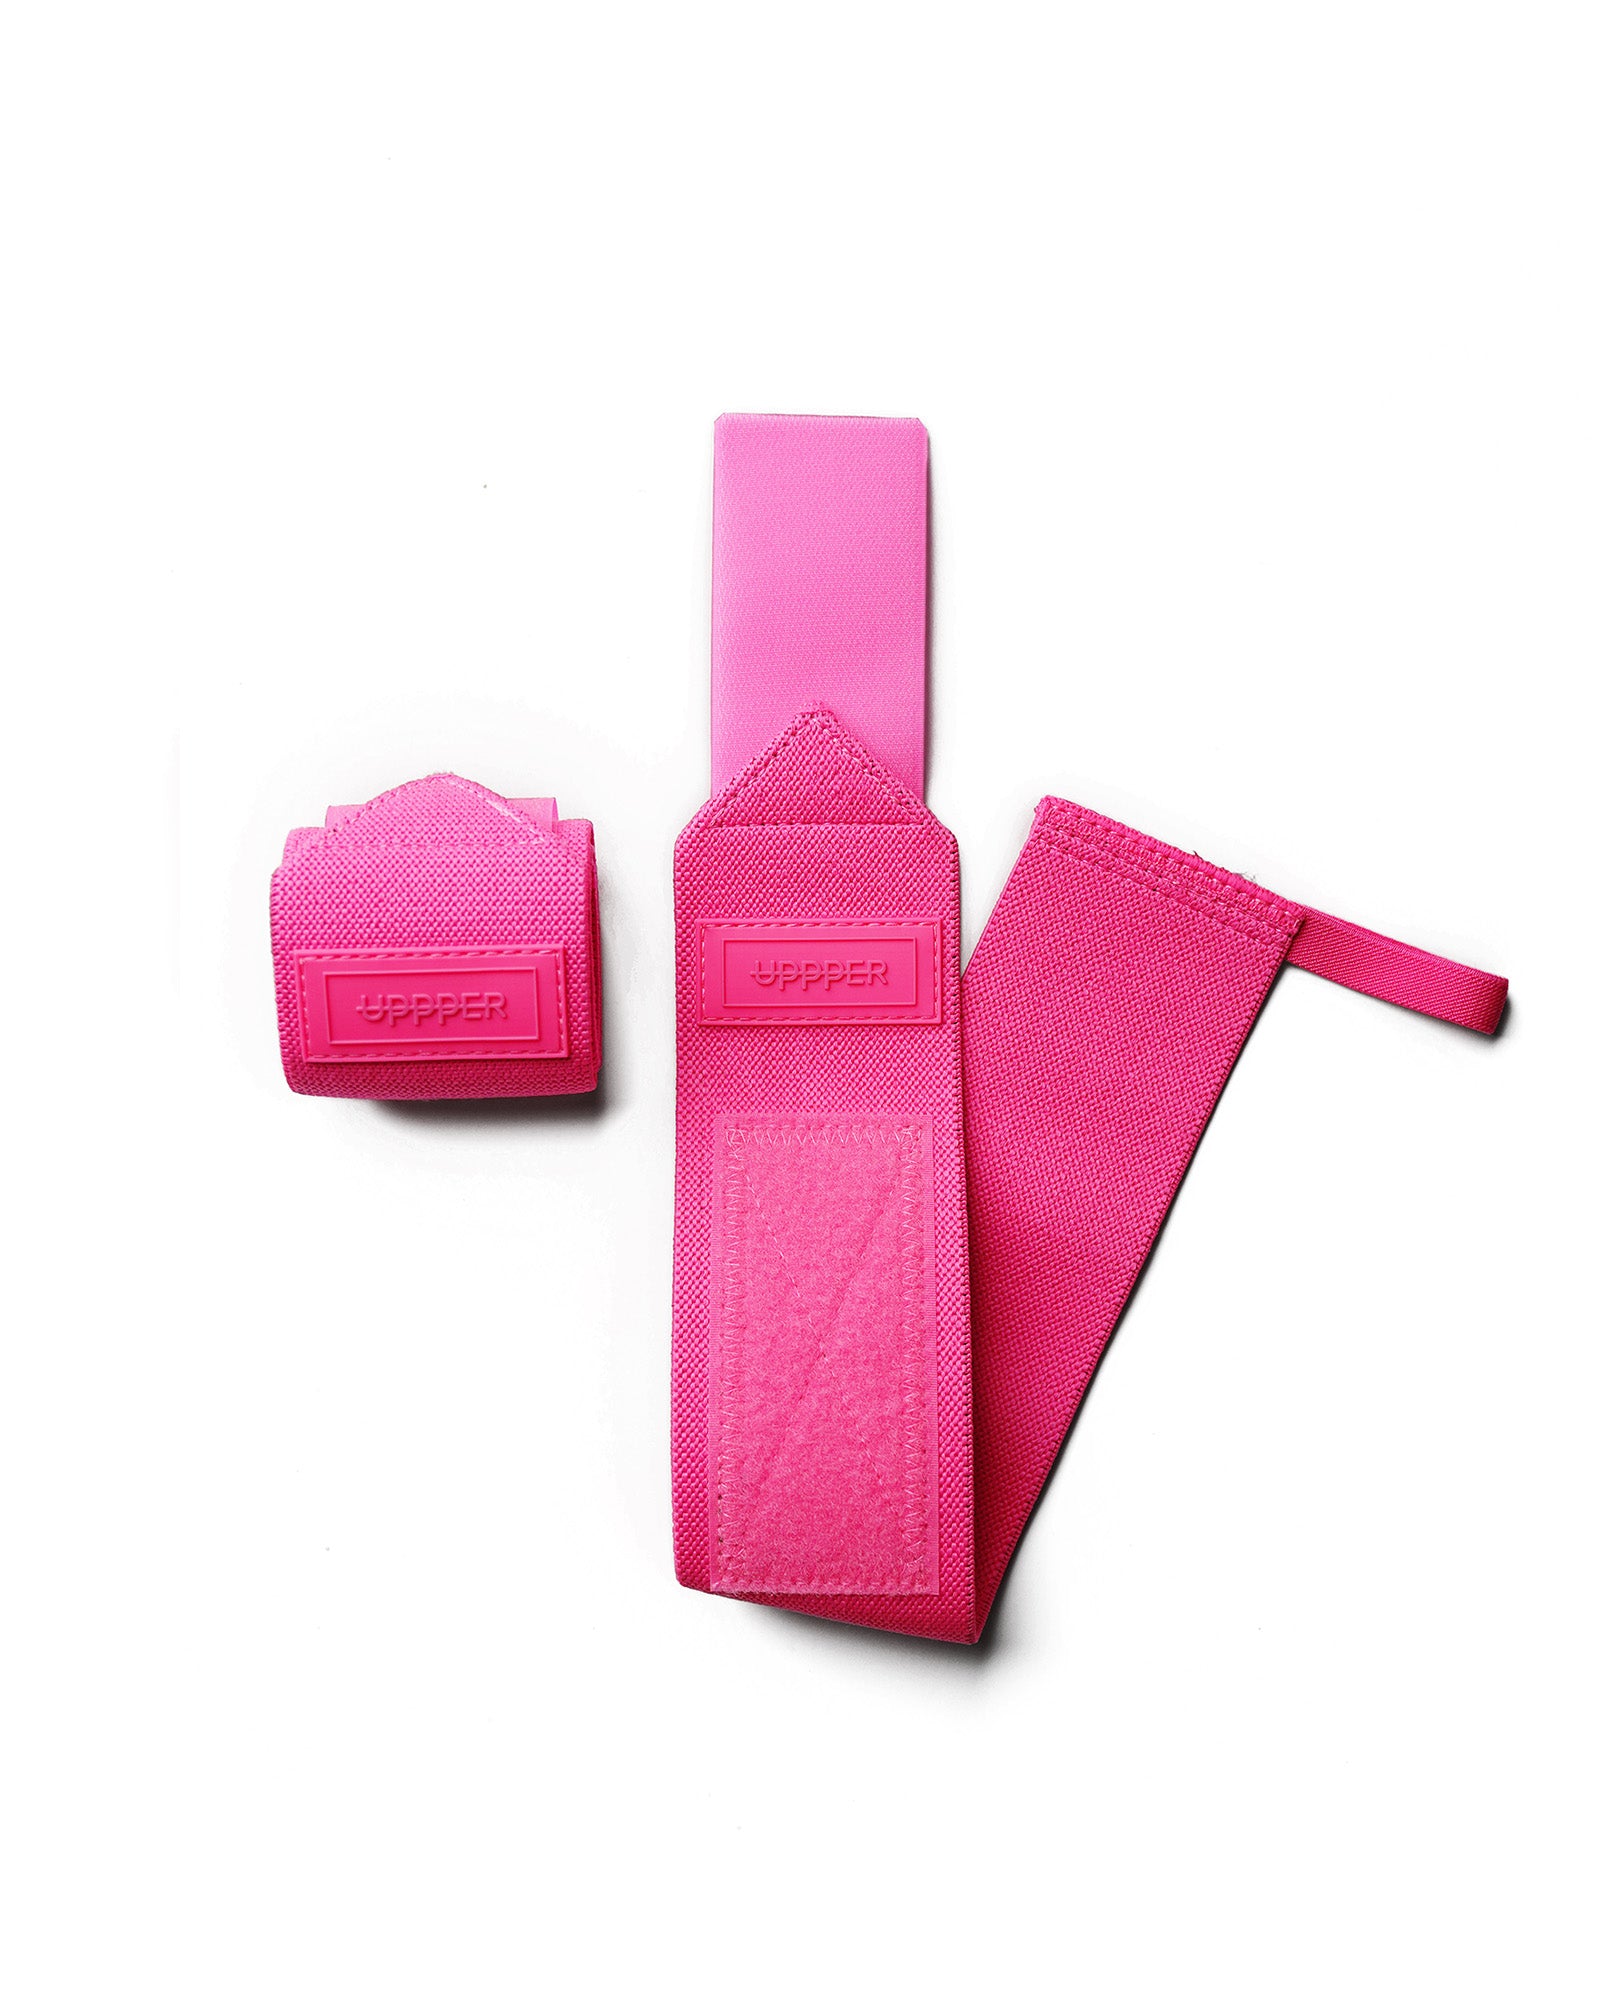 Lifting Straps – UPPPER Gear